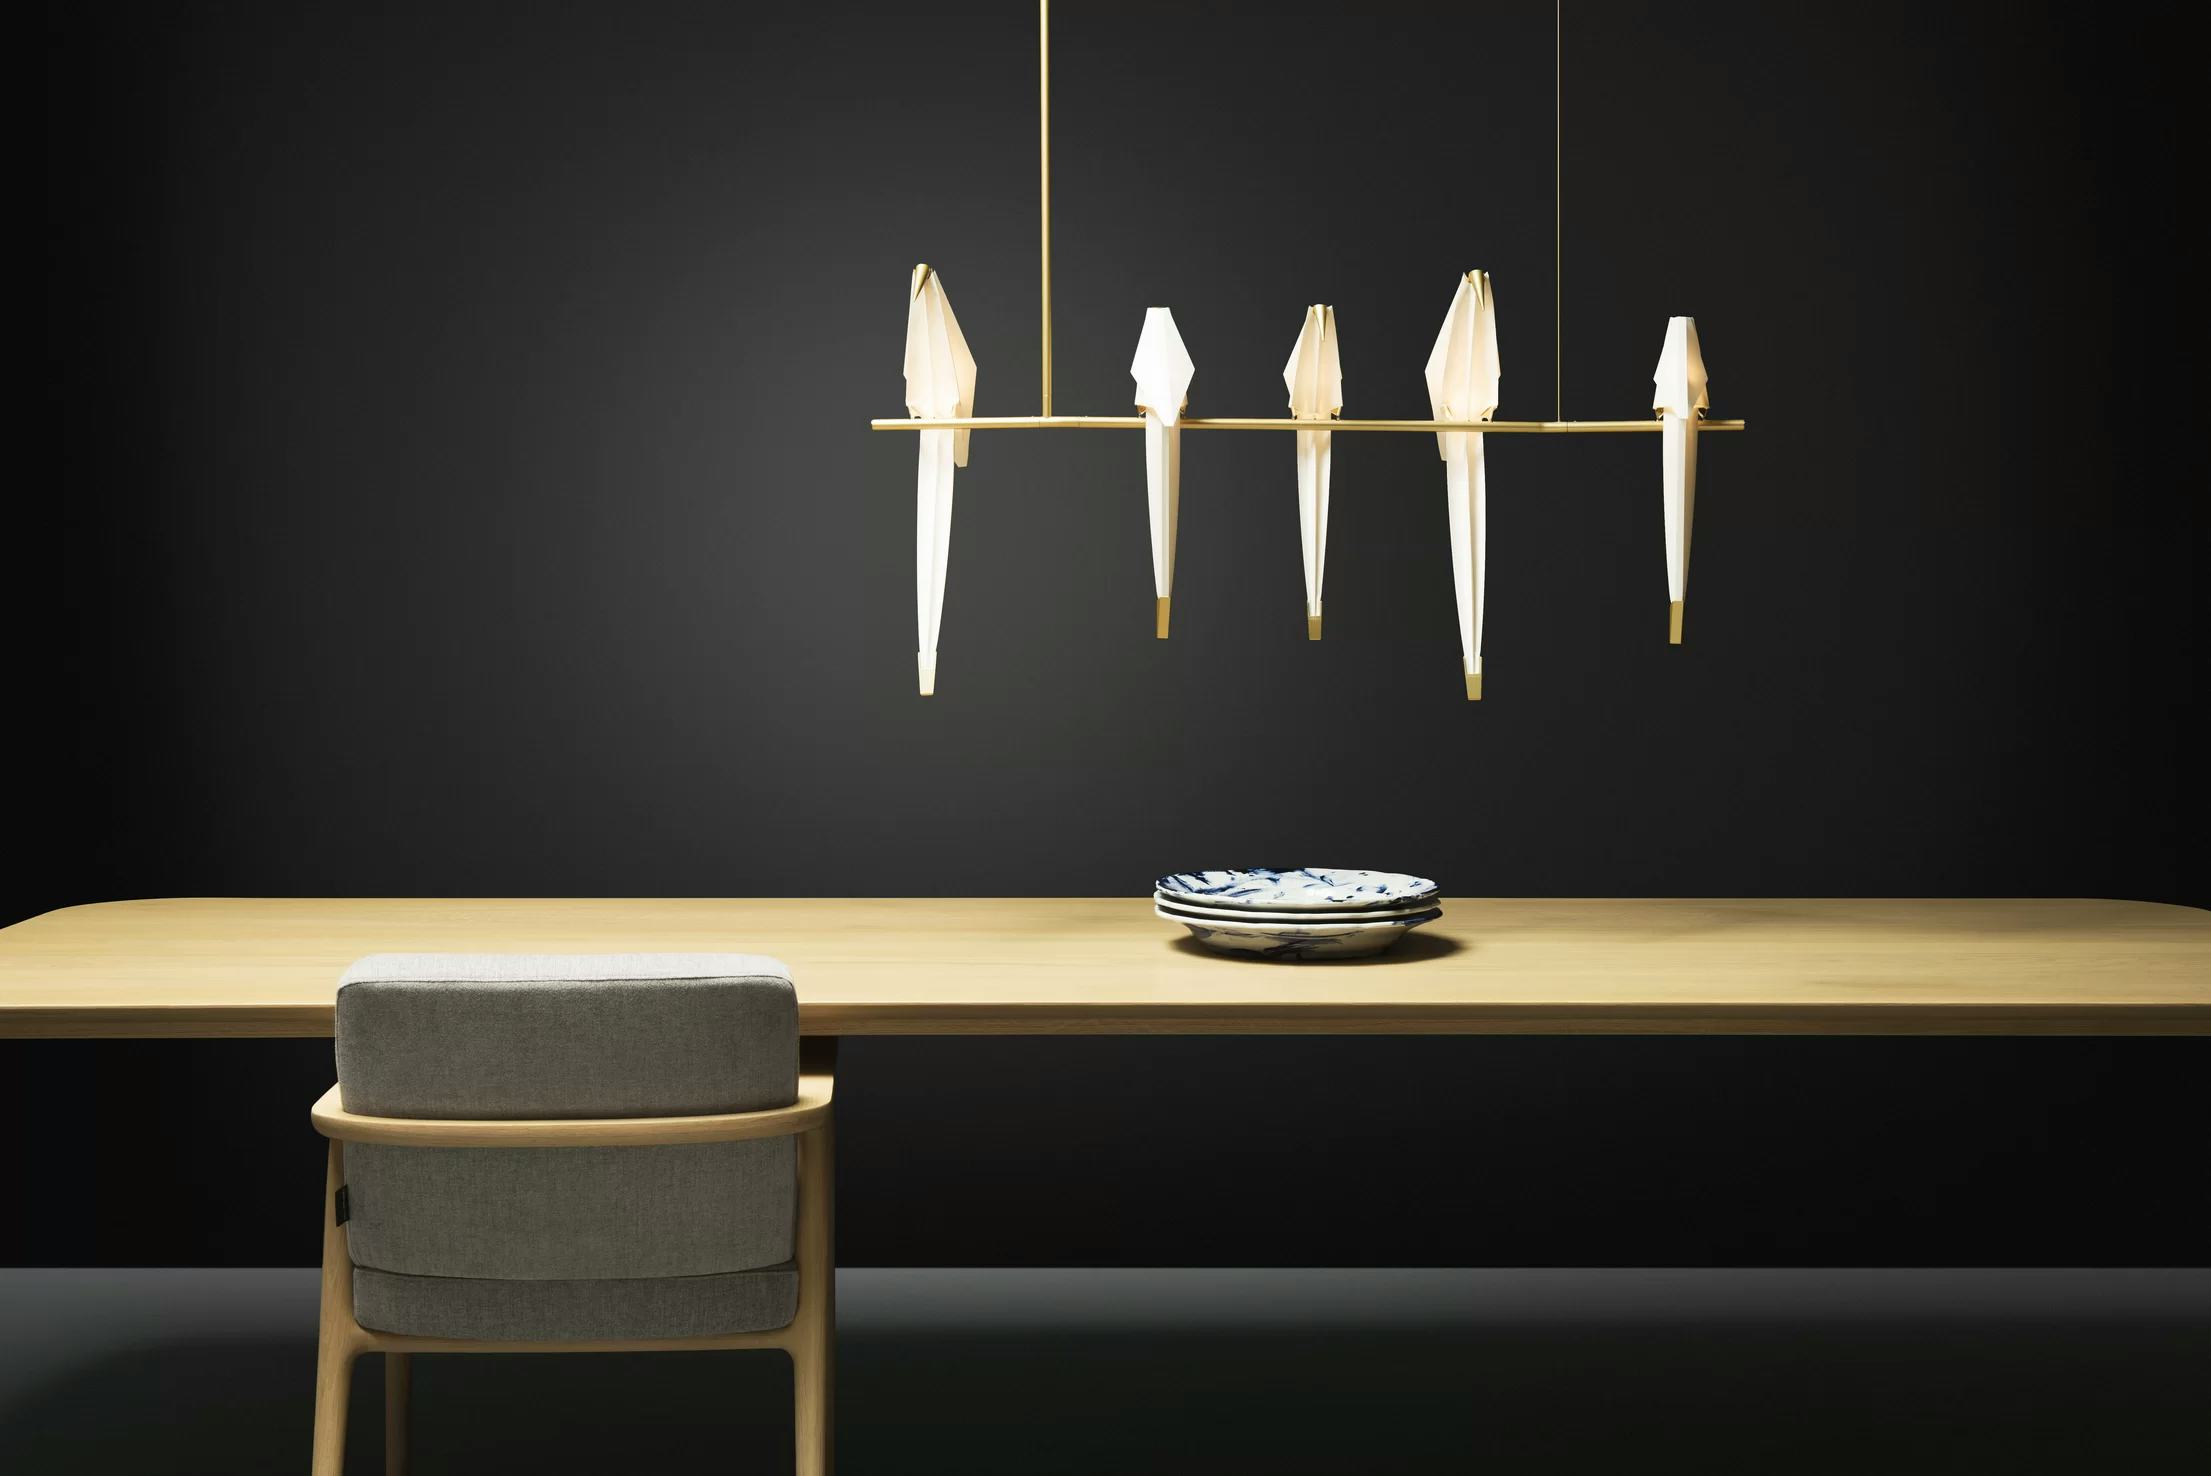 Perch Light Branch above dining table with black background